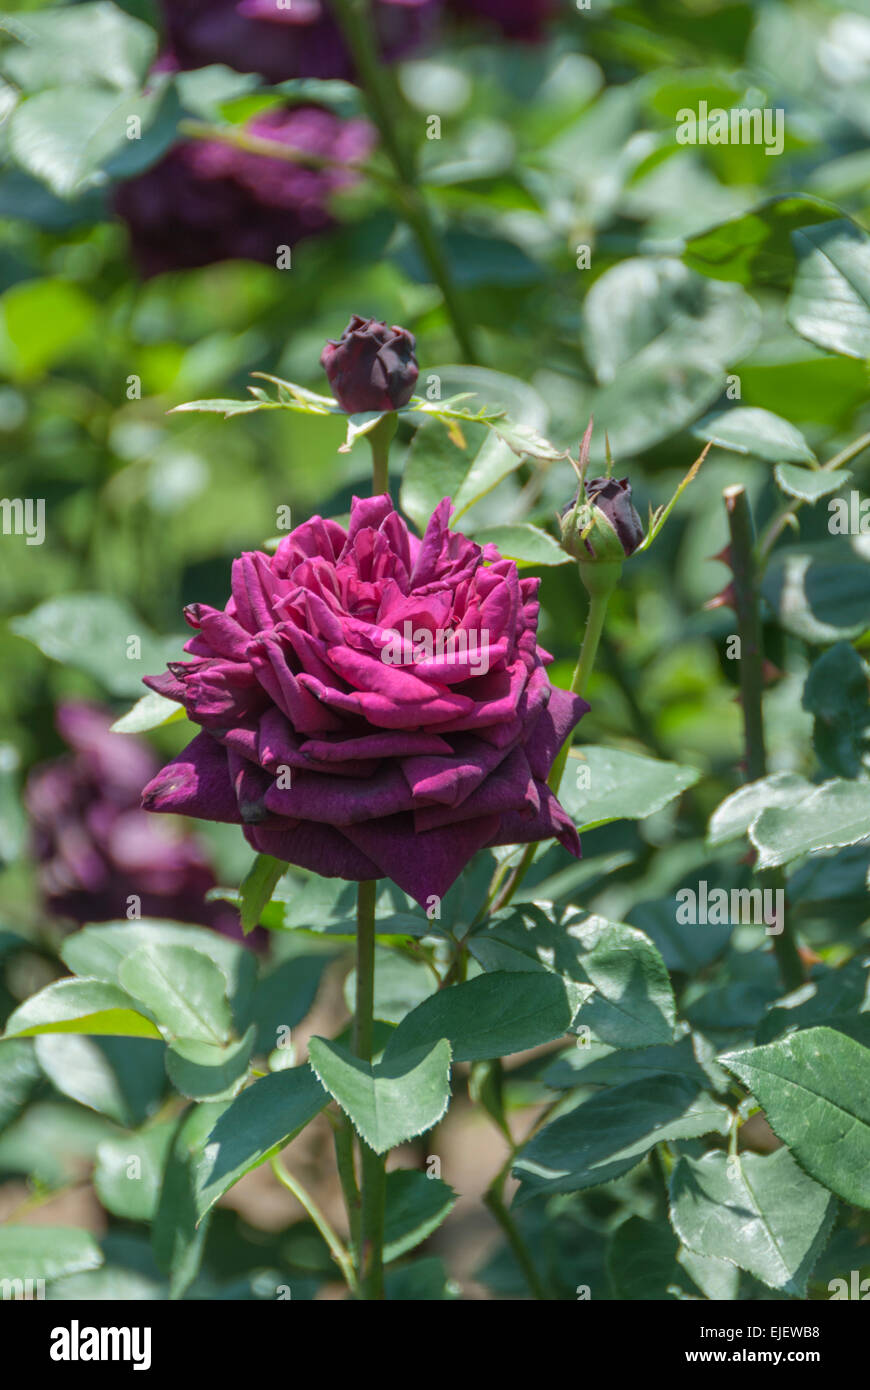 The Prince Rose - a dark purple variety - in full bloom Stock Photo - Alamy